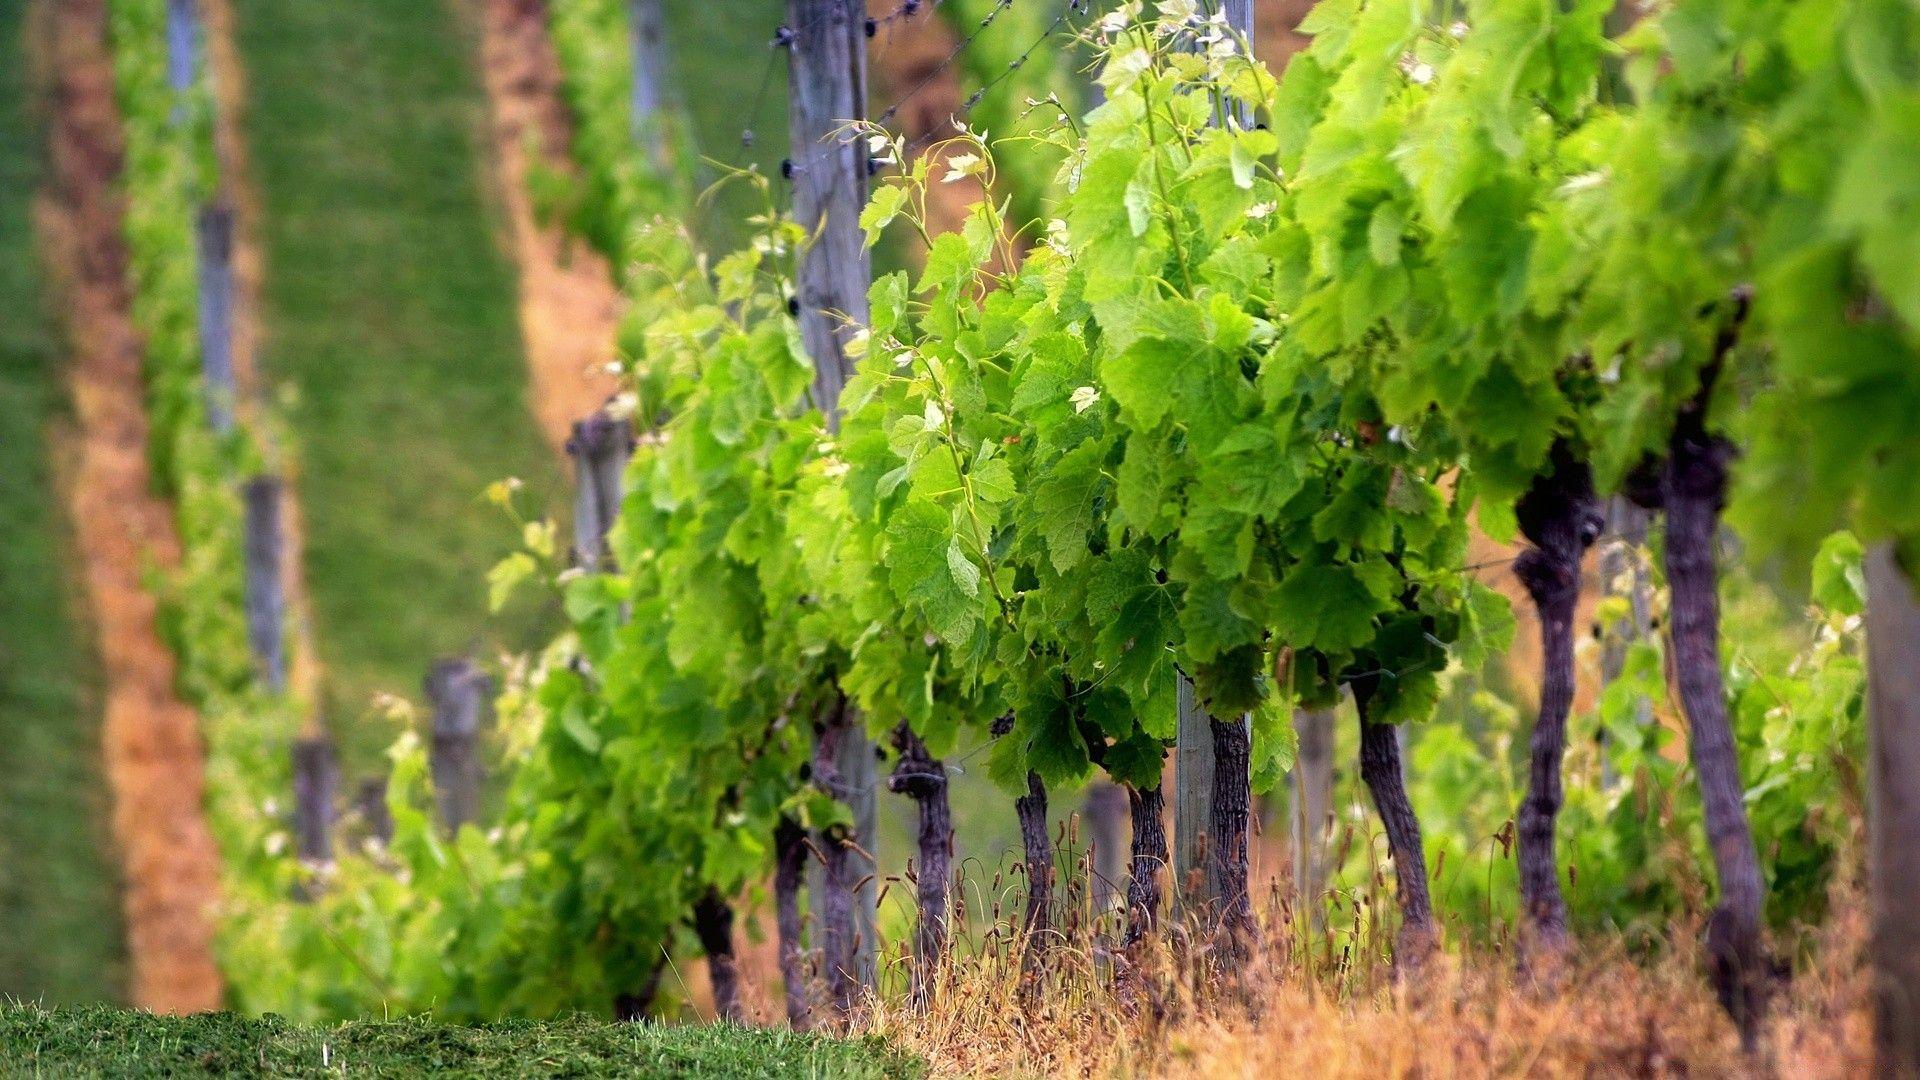 Grape Vines. Android wallpaper for free